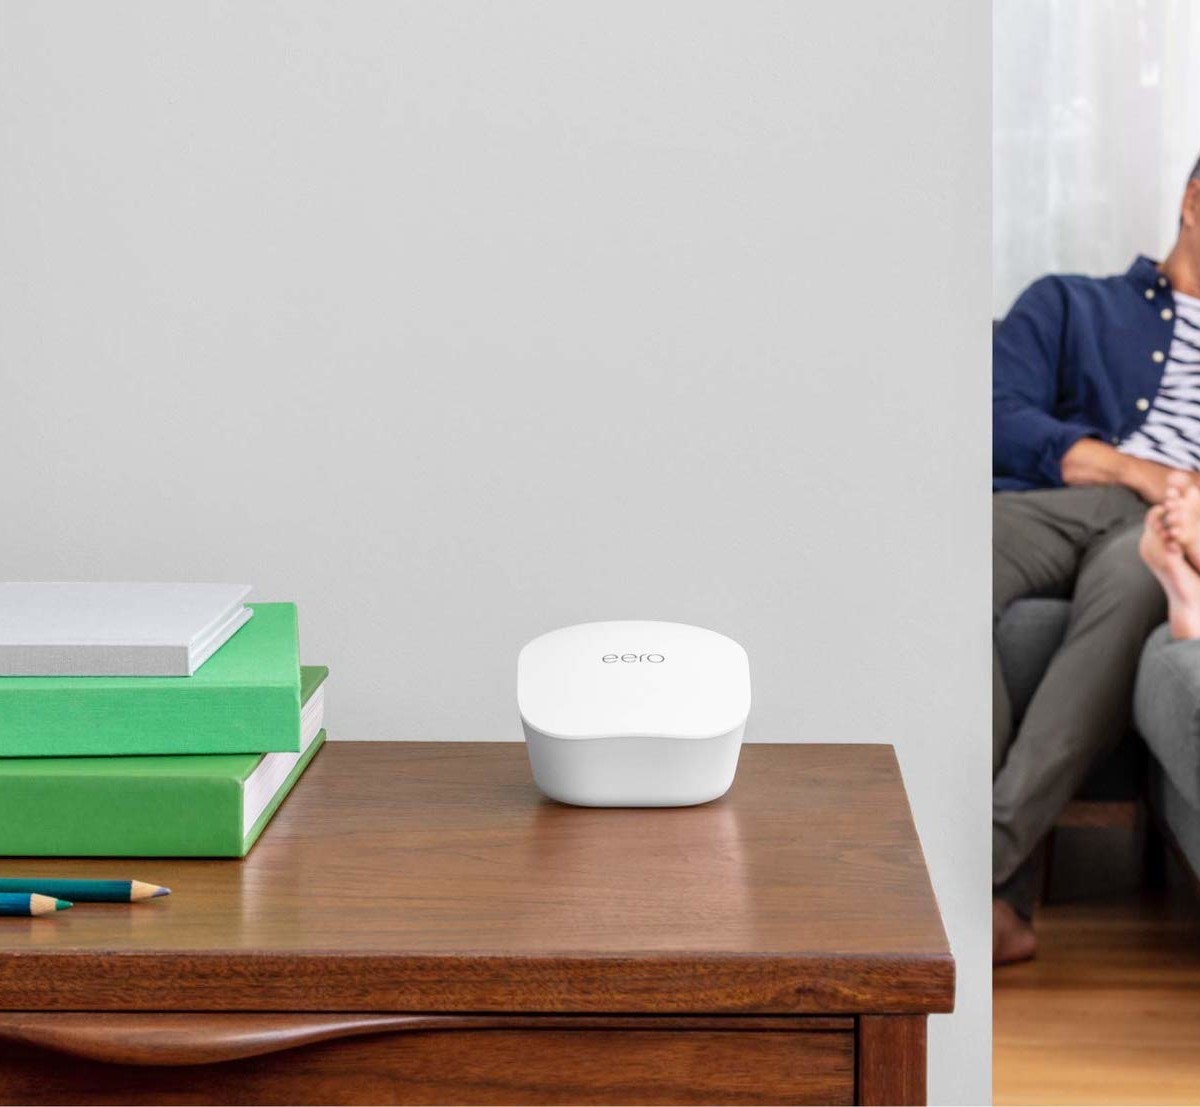 eero Mesh Wi-Fi Router Whole-Home Internet System gives your home up to 1,500 square feet of fast internet